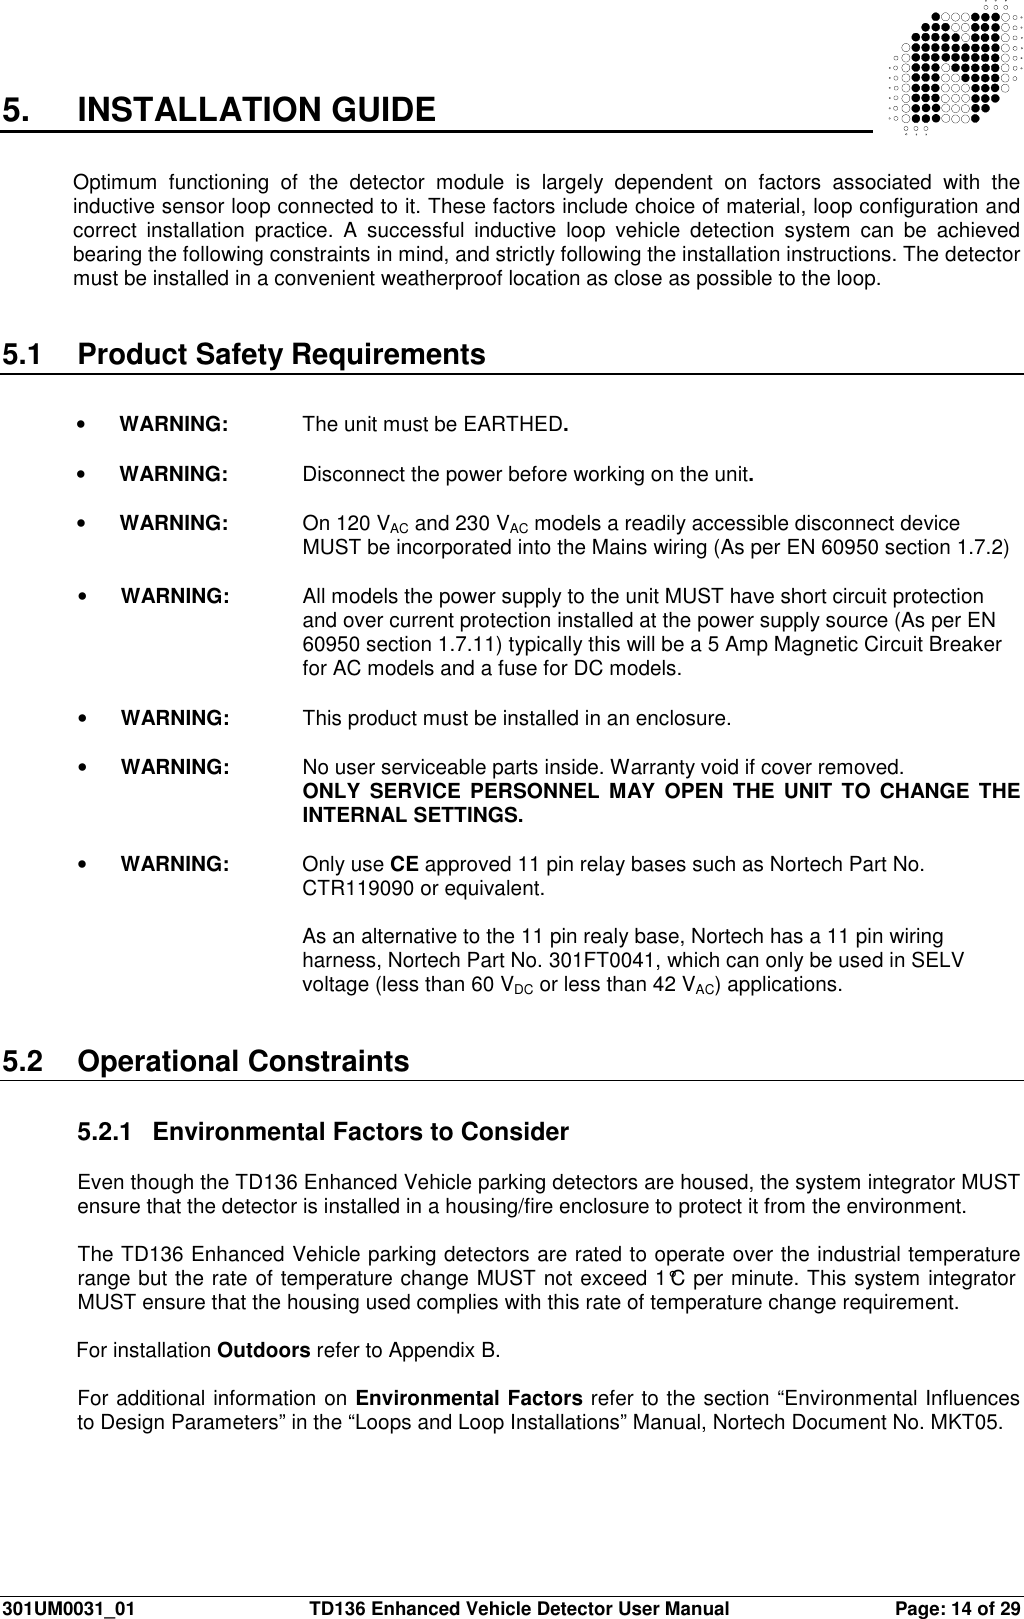  301UM0031_01  TD136 Enhanced Vehicle Detector User Manual  Page: 14 of 29  5.  INSTALLATION GUIDE  Optimum  functioning  of  the  detector  module  is  largely  dependent  on  factors  associated  with  the inductive sensor loop connected to it. These factors include choice of material, loop configuration and correct  installation  practice.  A  successful  inductive  loop  vehicle  detection  system  can  be  achieved bearing the following constraints in mind, and strictly following the installation instructions. The detector must be installed in a convenient weatherproof location as close as possible to the loop.    5.1  Product Safety Requirements  •  WARNING:   The unit must be EARTHED.  •  WARNING:   Disconnect the power before working on the unit.  •  WARNING:   On 120 VAC and 230 VAC models a readily accessible disconnect device     MUST be incorporated into the Mains wiring (As per EN 60950 section 1.7.2)  •  WARNING:   All models the power supply to the unit MUST have short circuit protection  and over current protection installed at the power supply source (As per EN  60950 section 1.7.11) typically this will be a 5 Amp Magnetic Circuit Breaker  for AC models and a fuse for DC models.  •  WARNING:  This product must be installed in an enclosure.  •  WARNING:  No user serviceable parts inside. Warranty void if cover removed. ONLY  SERVICE PERSONNEL  MAY OPEN  THE  UNIT TO  CHANGE  THE INTERNAL SETTINGS.  •  WARNING:   Only use CE approved 11 pin relay bases such as Nortech Part No.  CTR119090 or equivalent.  As an alternative to the 11 pin realy base, Nortech has a 11 pin wiring harness, Nortech Part No. 301FT0041, which can only be used in SELV voltage (less than 60 VDC or less than 42 VAC) applications.   5.2  Operational Constraints  5.2.1  Environmental Factors to Consider  Even though the TD136 Enhanced Vehicle parking detectors are housed, the system integrator MUST ensure that the detector is installed in a housing/fire enclosure to protect it from the environment.  The TD136 Enhanced Vehicle parking detectors are rated to operate over the industrial temperature range but the rate of temperature change MUST not exceed 1°C per minute. This system integrator MUST ensure that the housing used complies with this rate of temperature change requirement.  For installation Outdoors refer to Appendix B.  For additional information on Environmental Factors refer to the section “Environmental Influences to Design Parameters” in the “Loops and Loop Installations” Manual, Nortech Document No. MKT05.  